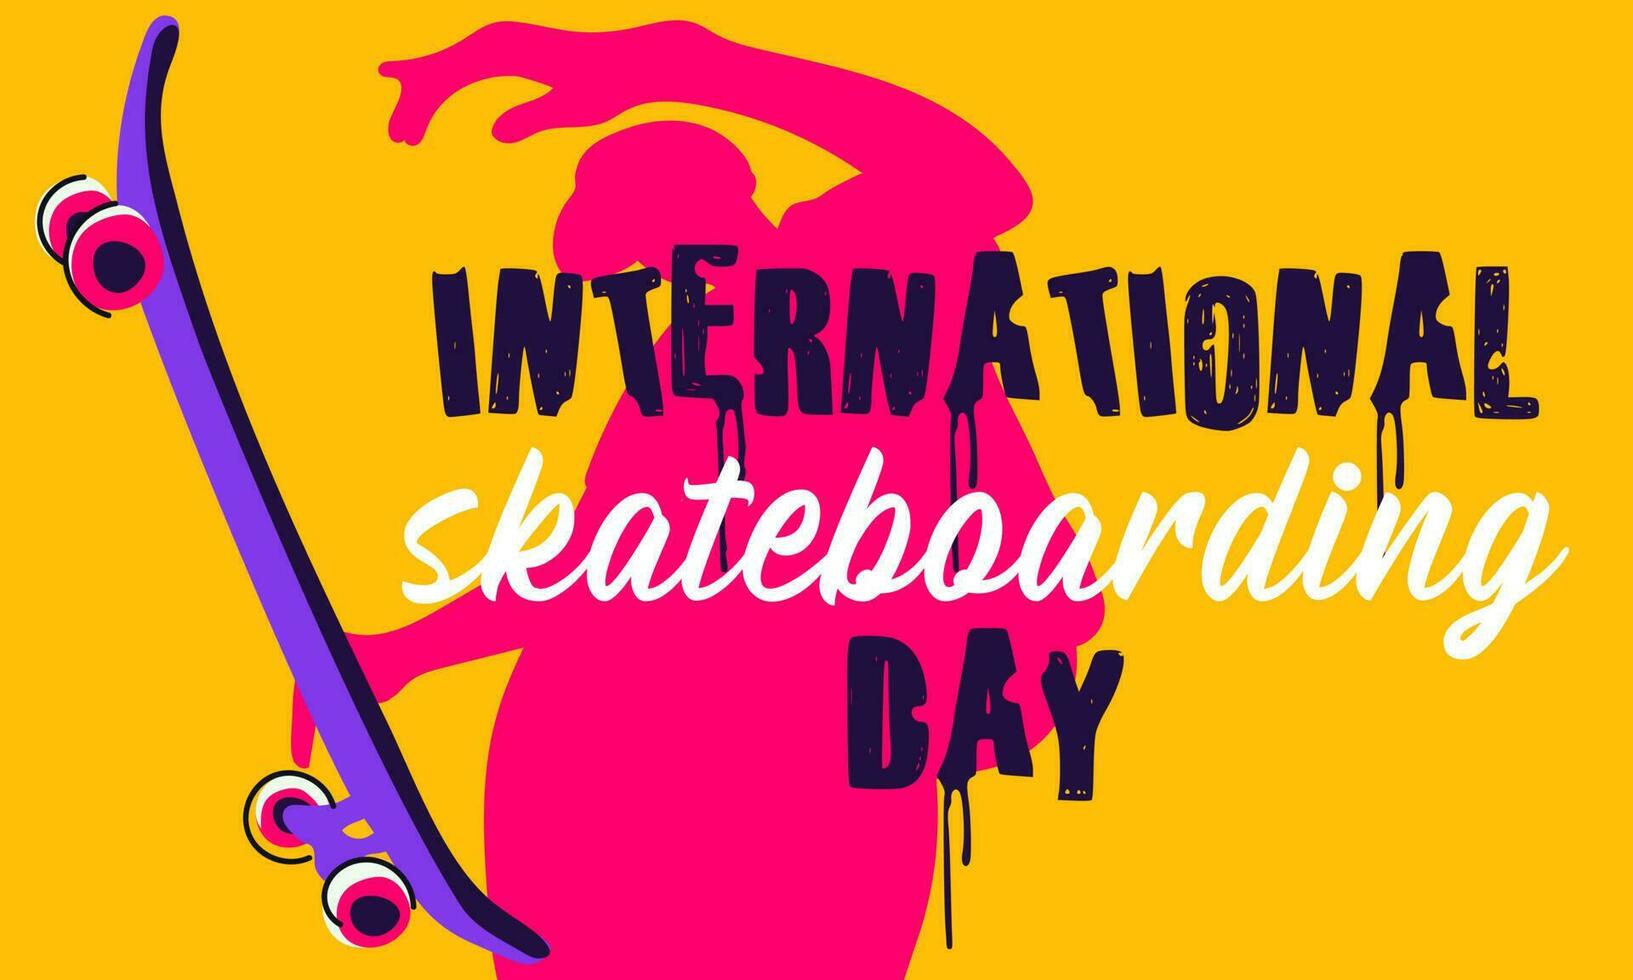 Banner of the International Skateboarding Day. The silhouette of a guy with a skateboard makes a jump on pink. Skateboard tricks, board riding, jumping. Skateboard June 21 horizontally vector